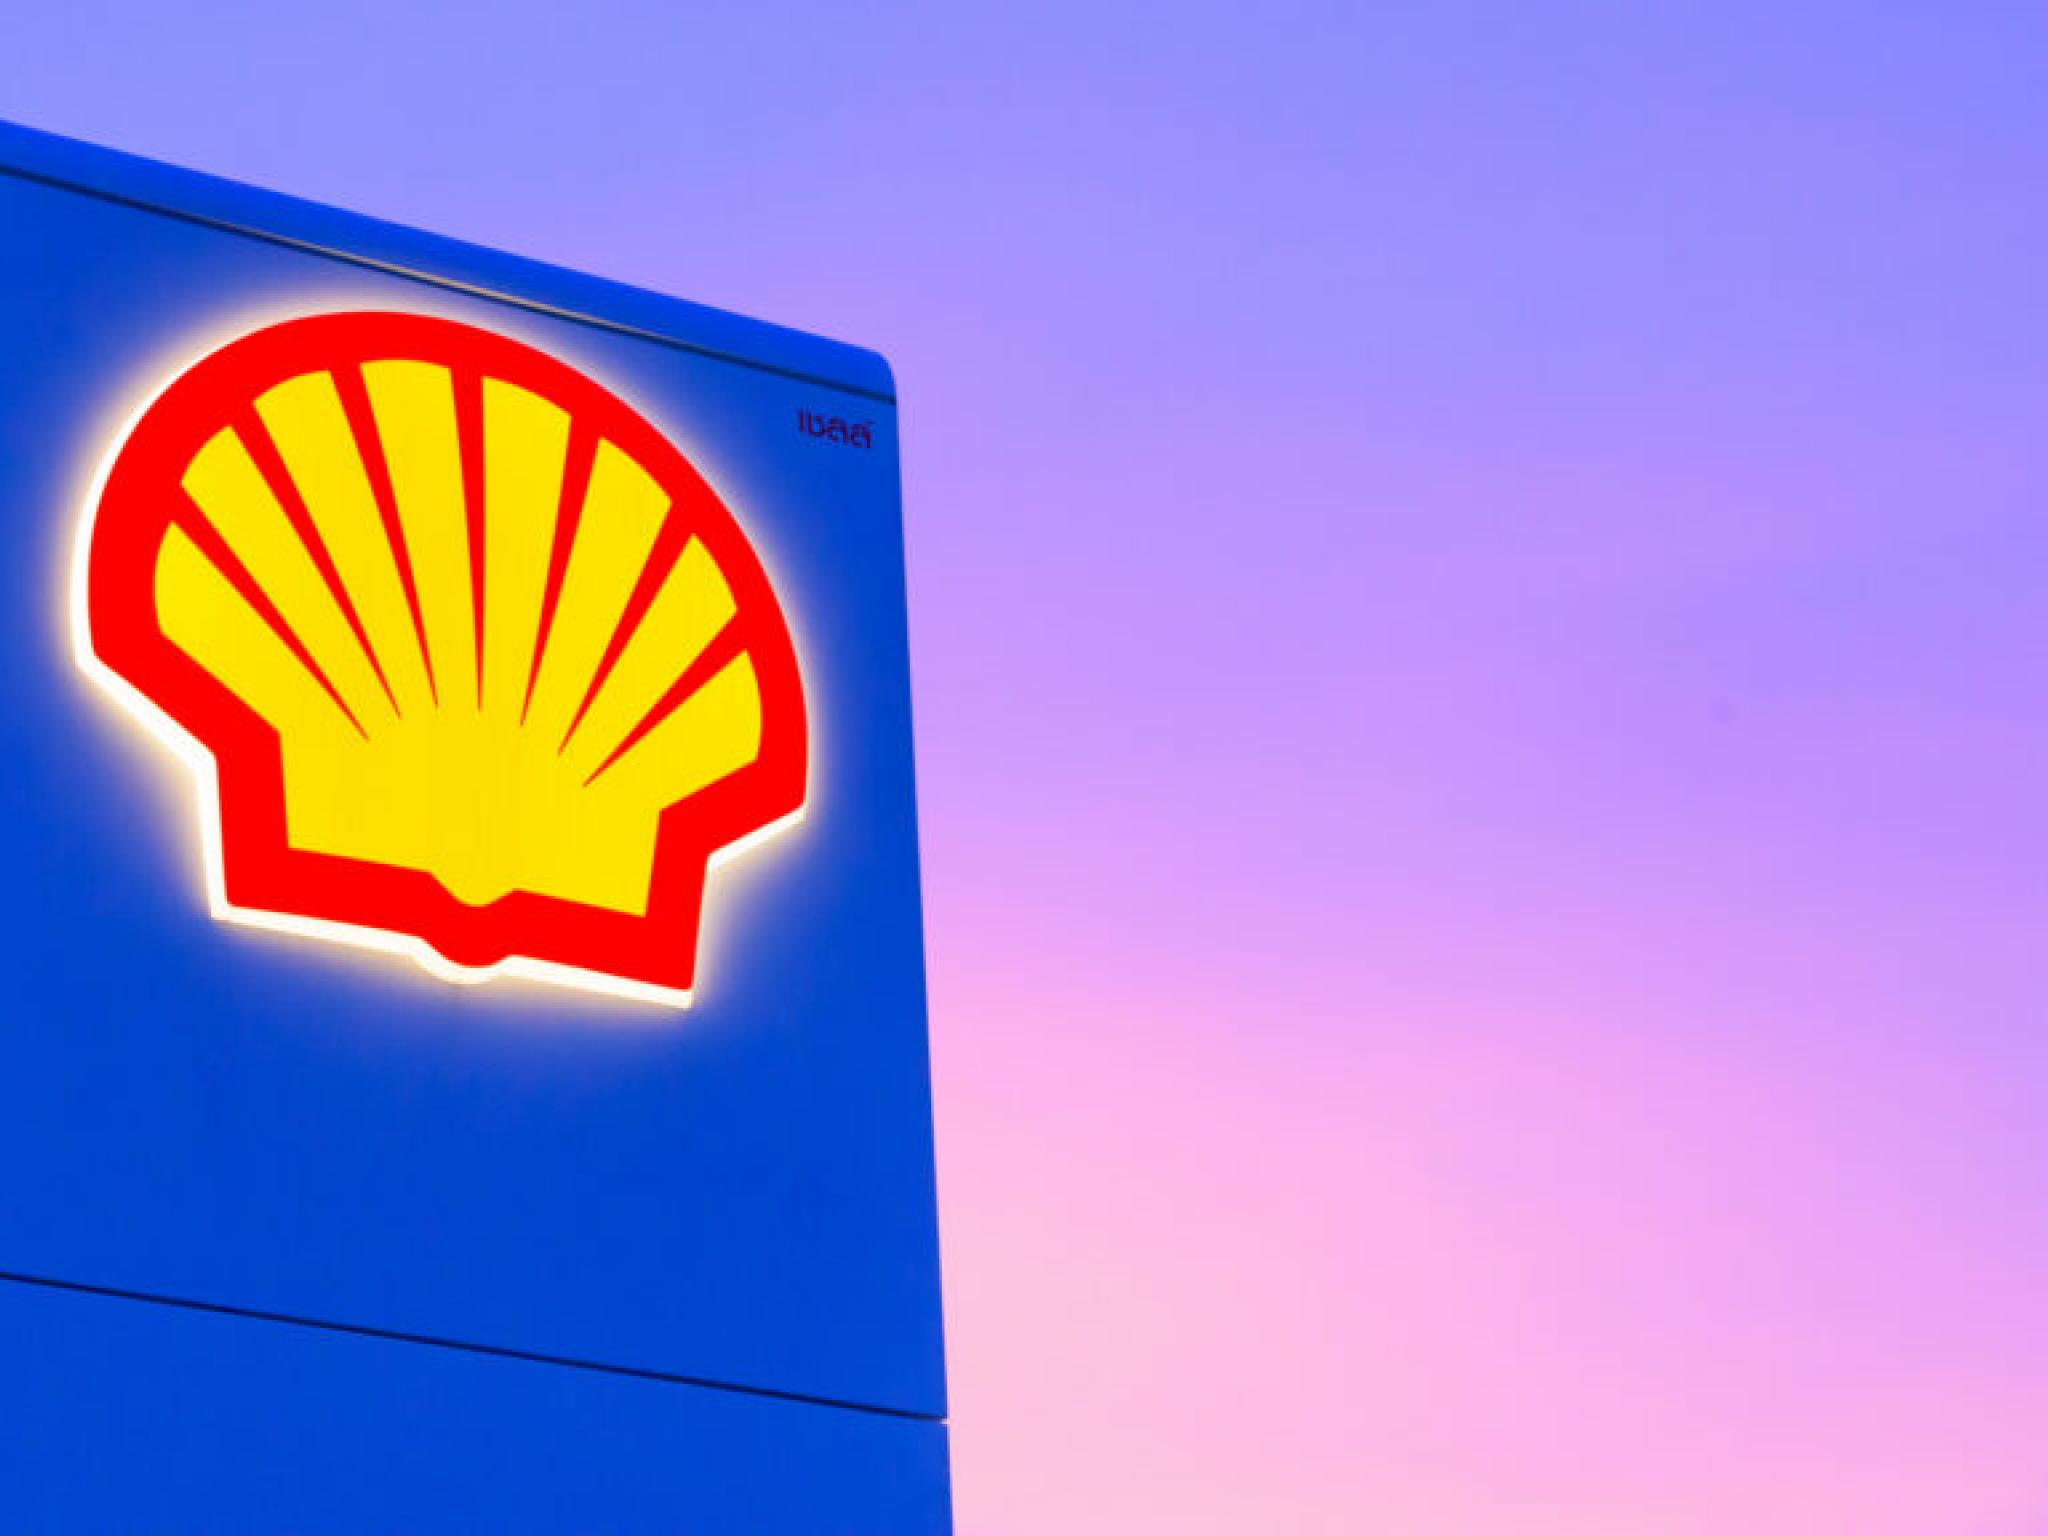  shell-to-acquire-pavilion-energy-assets-from-temasek-expanding-lng-market-reach-in-europe-and-singapore-report 